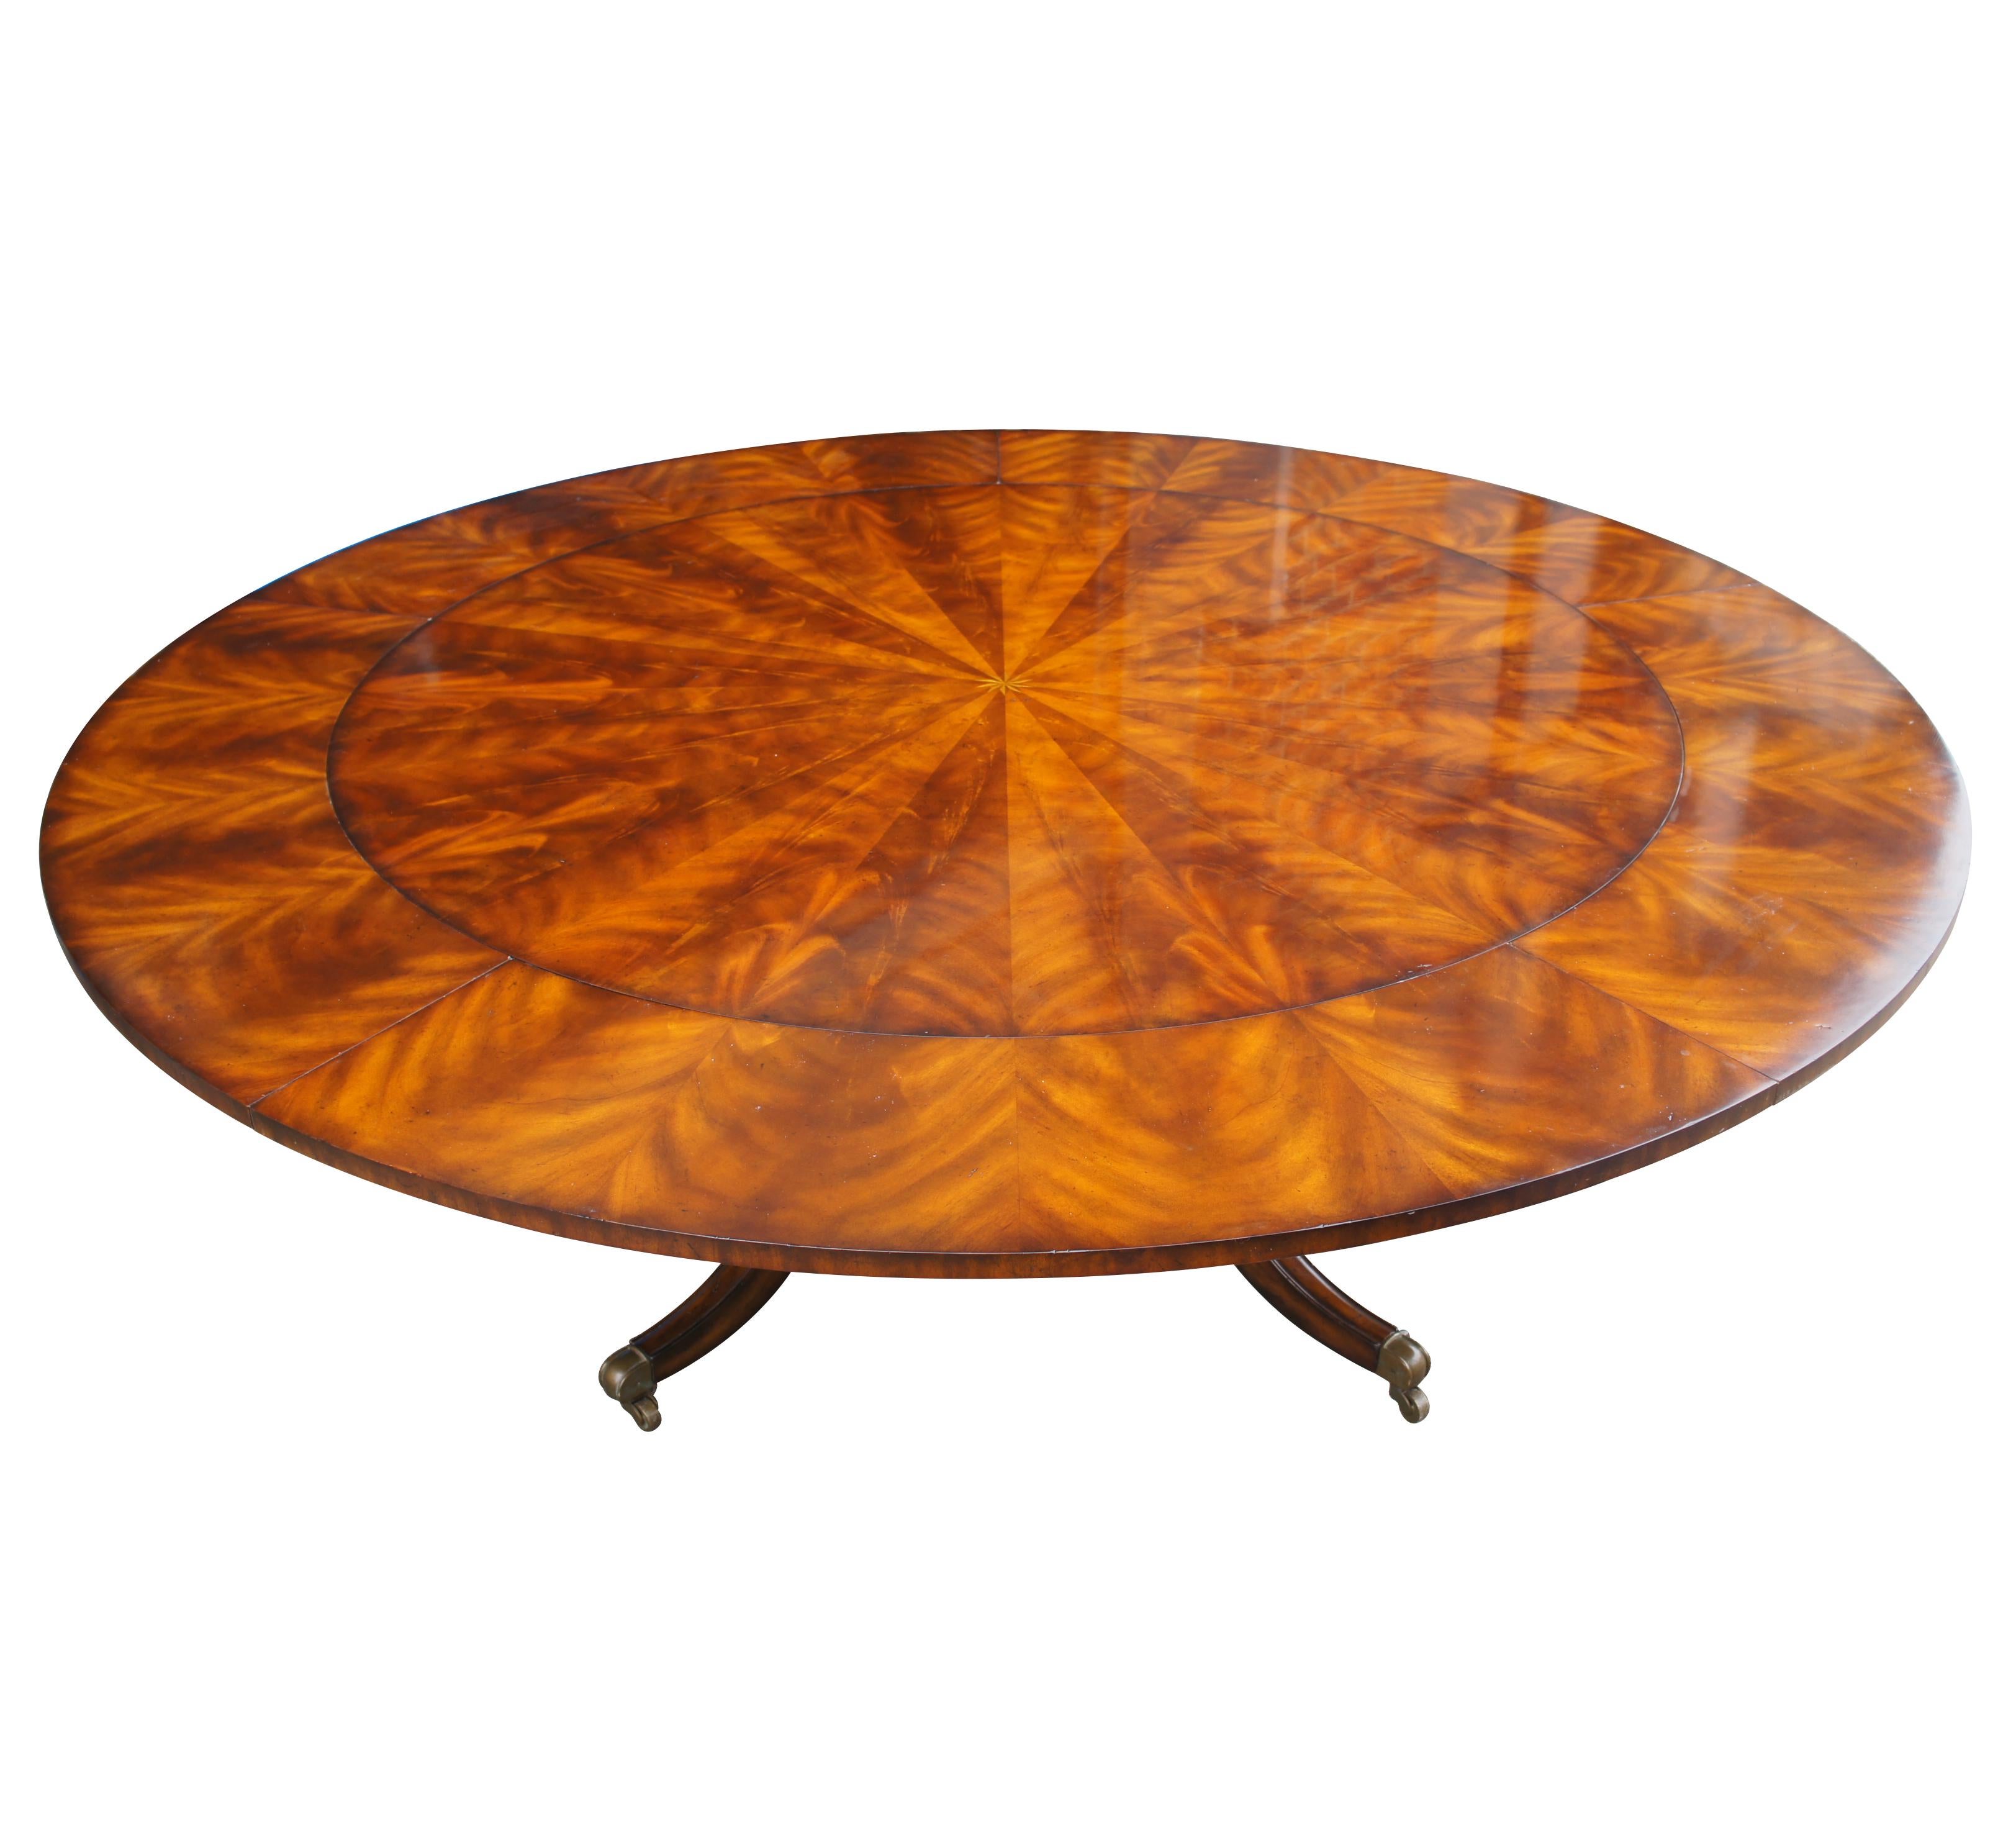 Maitland Smith Roundabout Dining Table.  Inspired by English Regency styling.  Features a two tone crotch mahogany extendable top with star inlay at the center over a birdcage base with turned baluster supports leading to downswept legs with brass